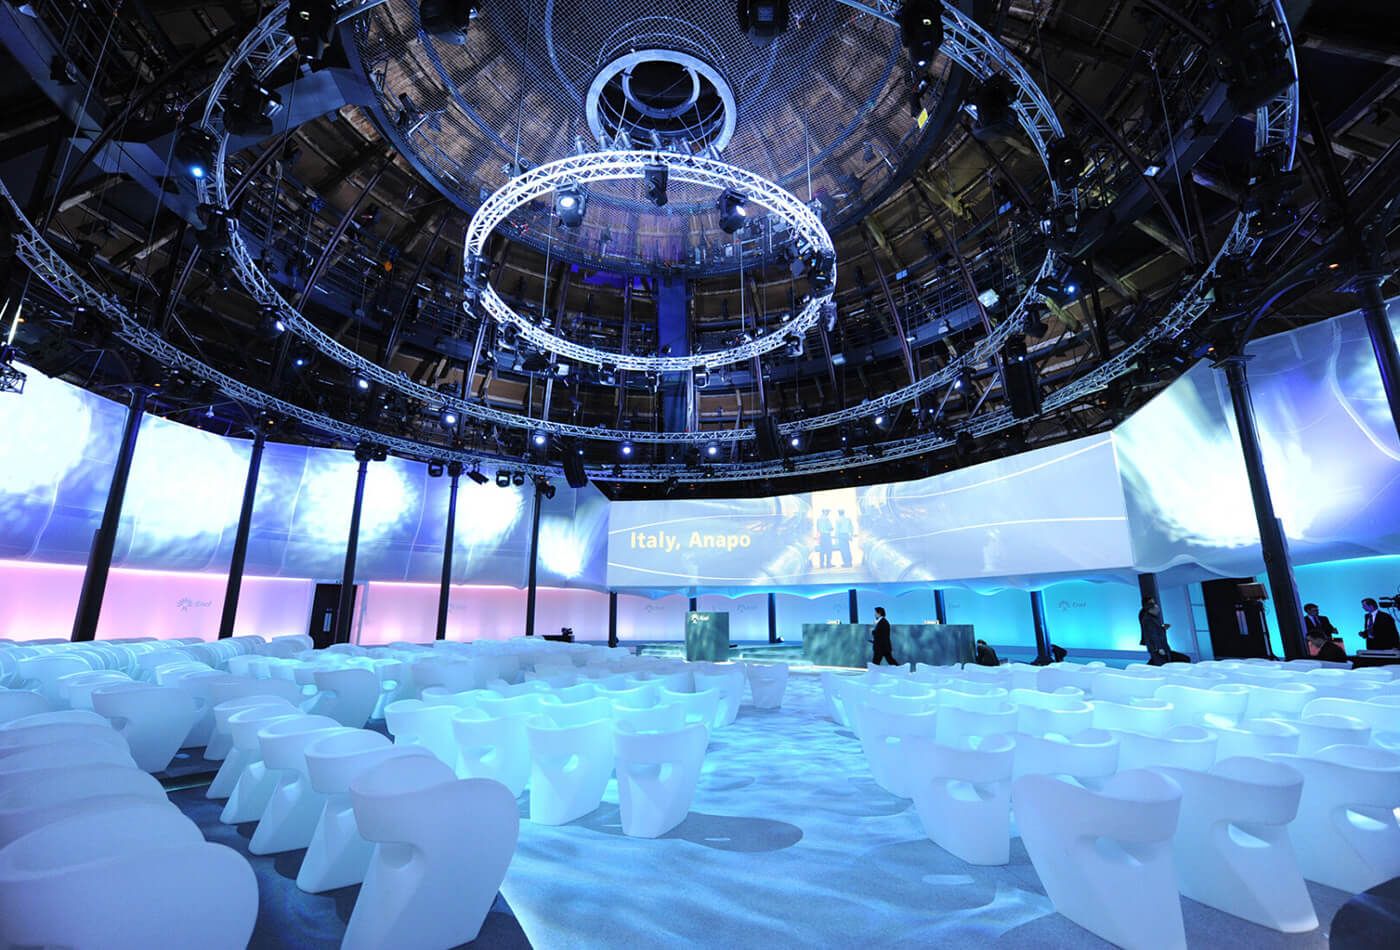 Vast circular conference space with white seating and high ceilings